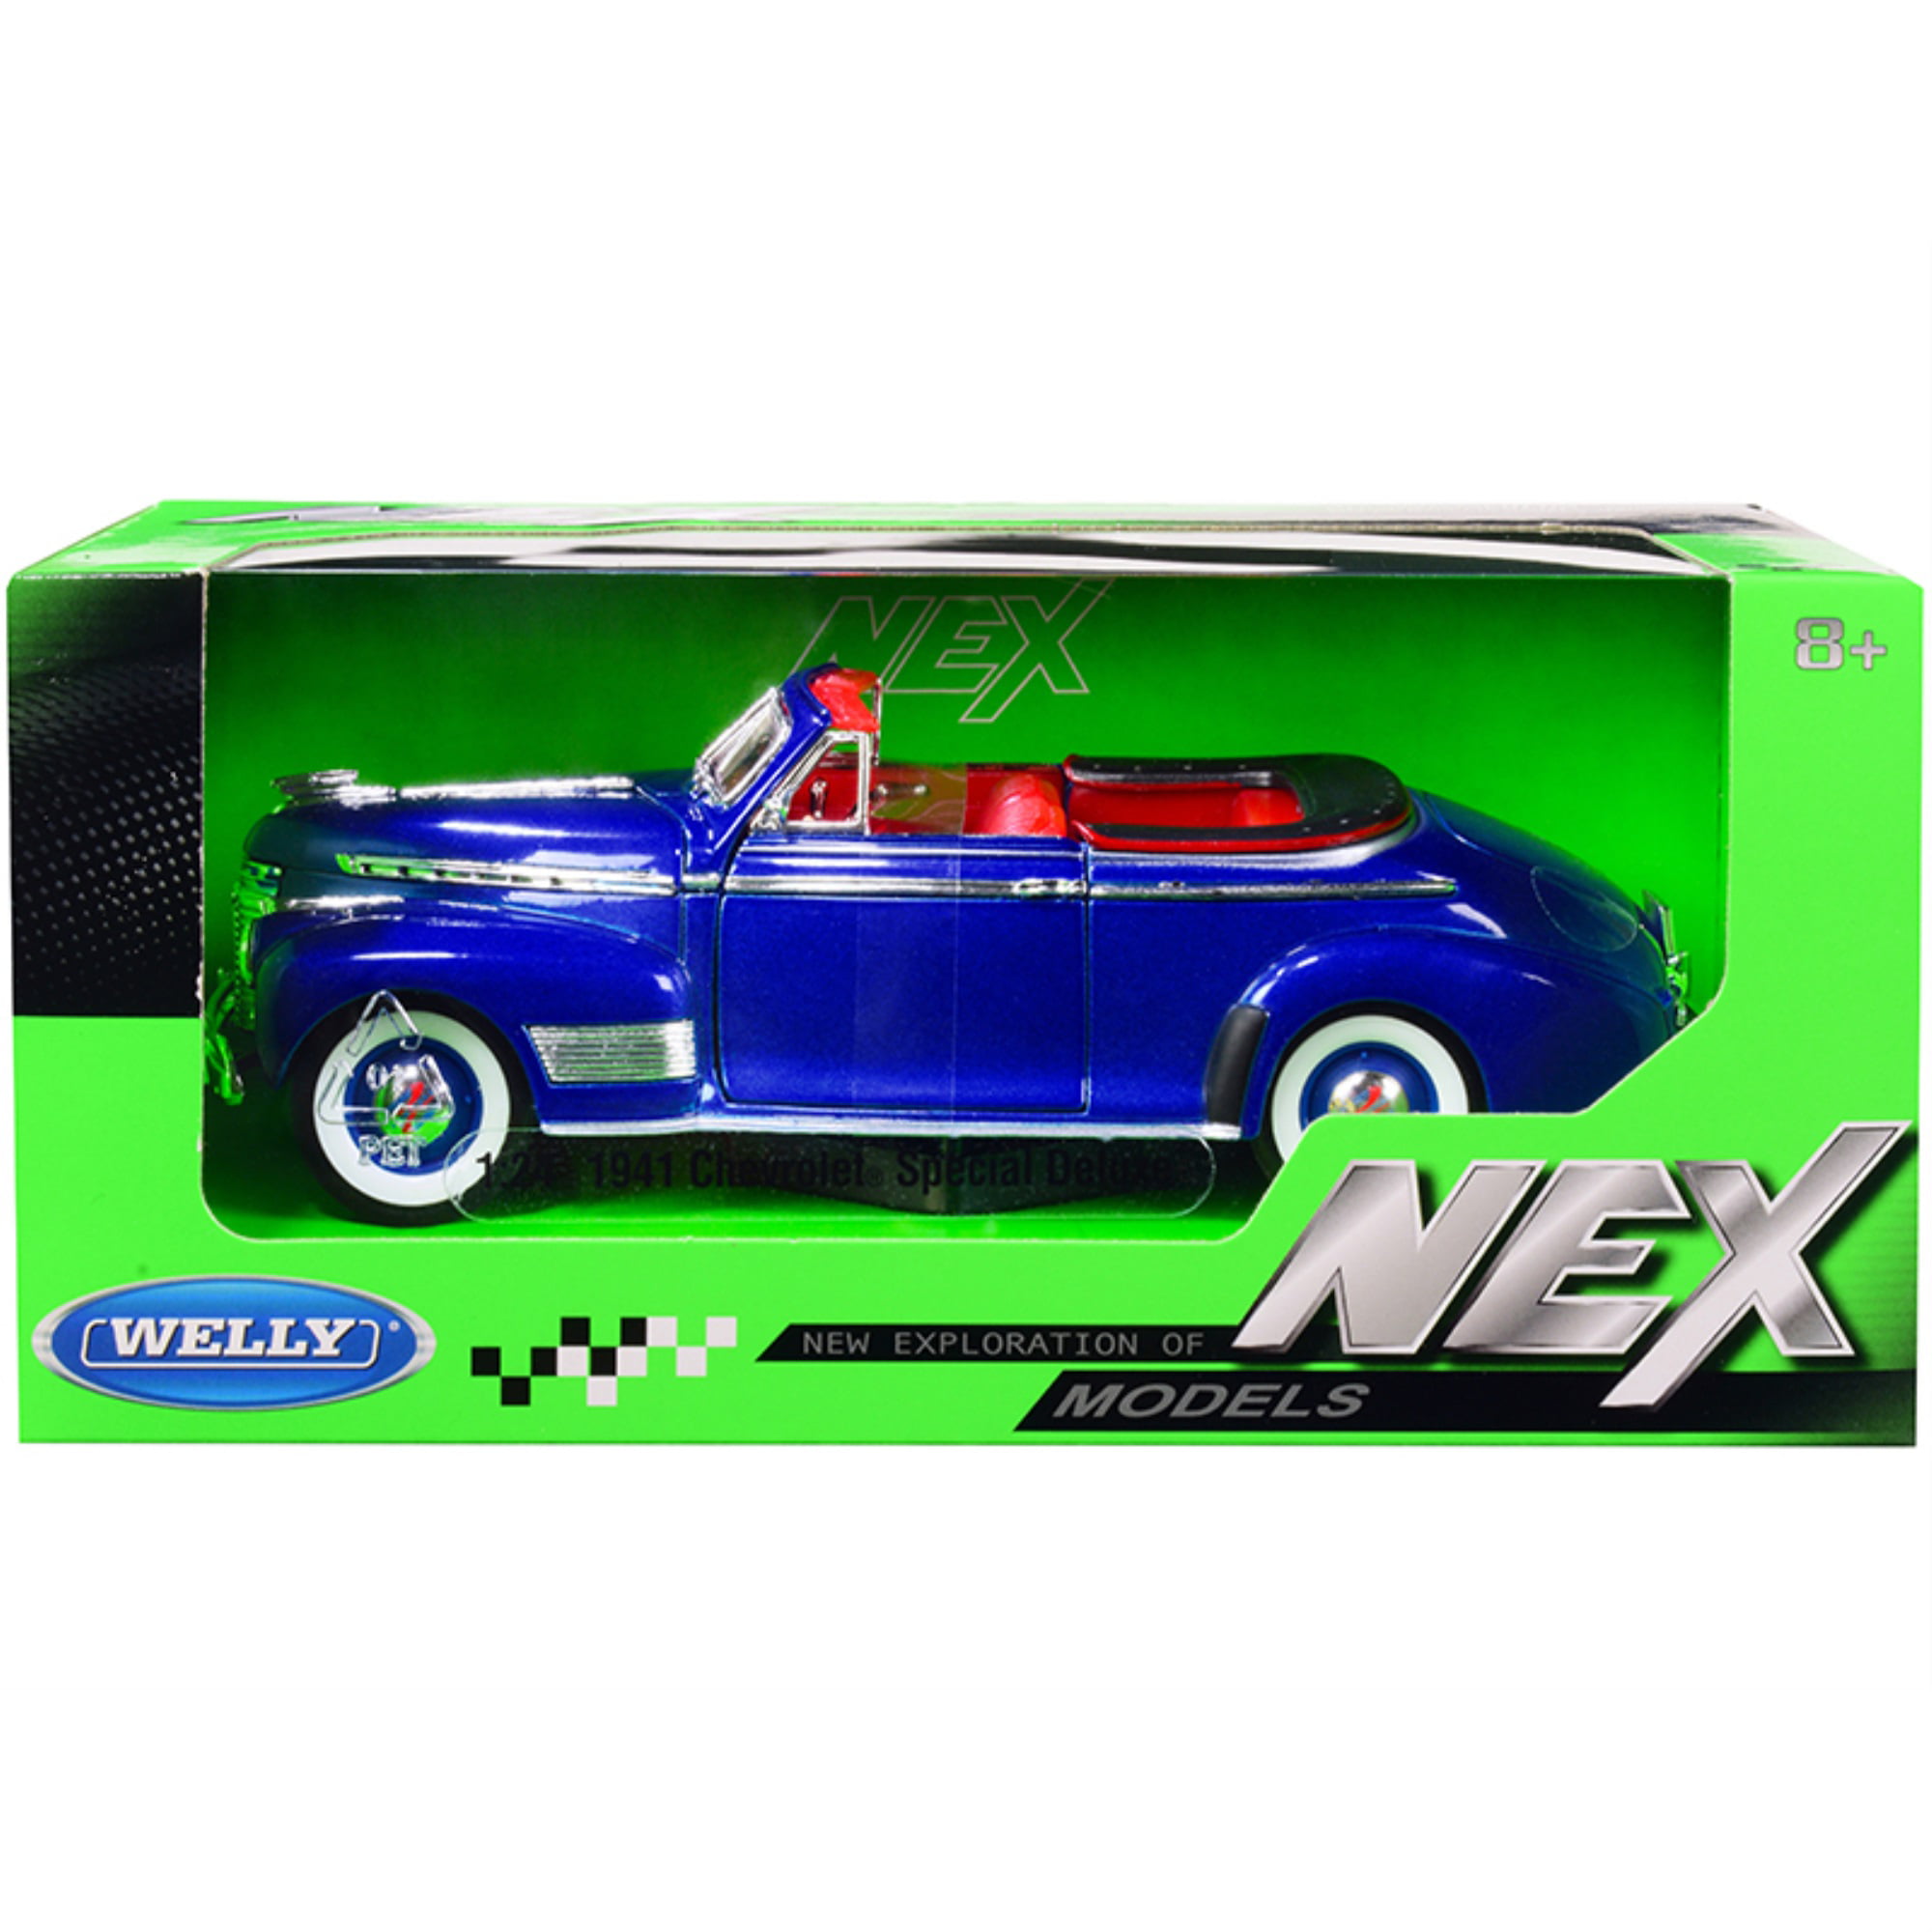 22411mbl 1-24 Scale Special Deluxe Convertible 1941 Chevrolet Diecast Model Car with Interior NEX Models, Metallic Blue & Red -  WELLY